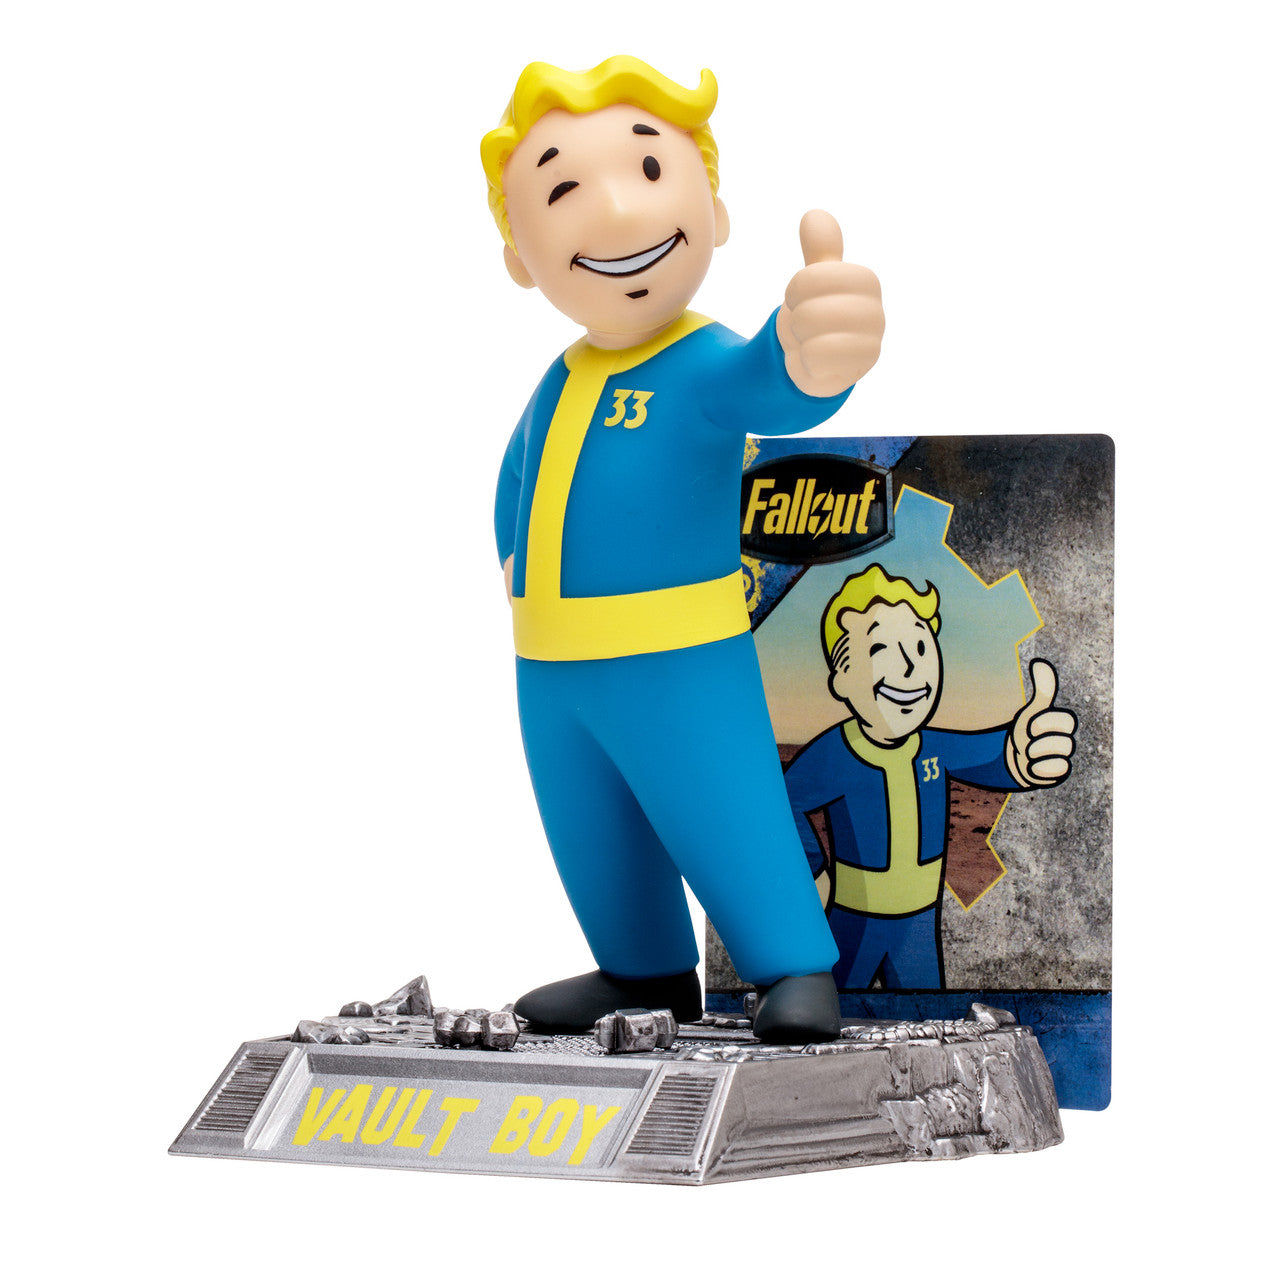 Vault Boy (Fallout) 6" Gold Label Posed Figure